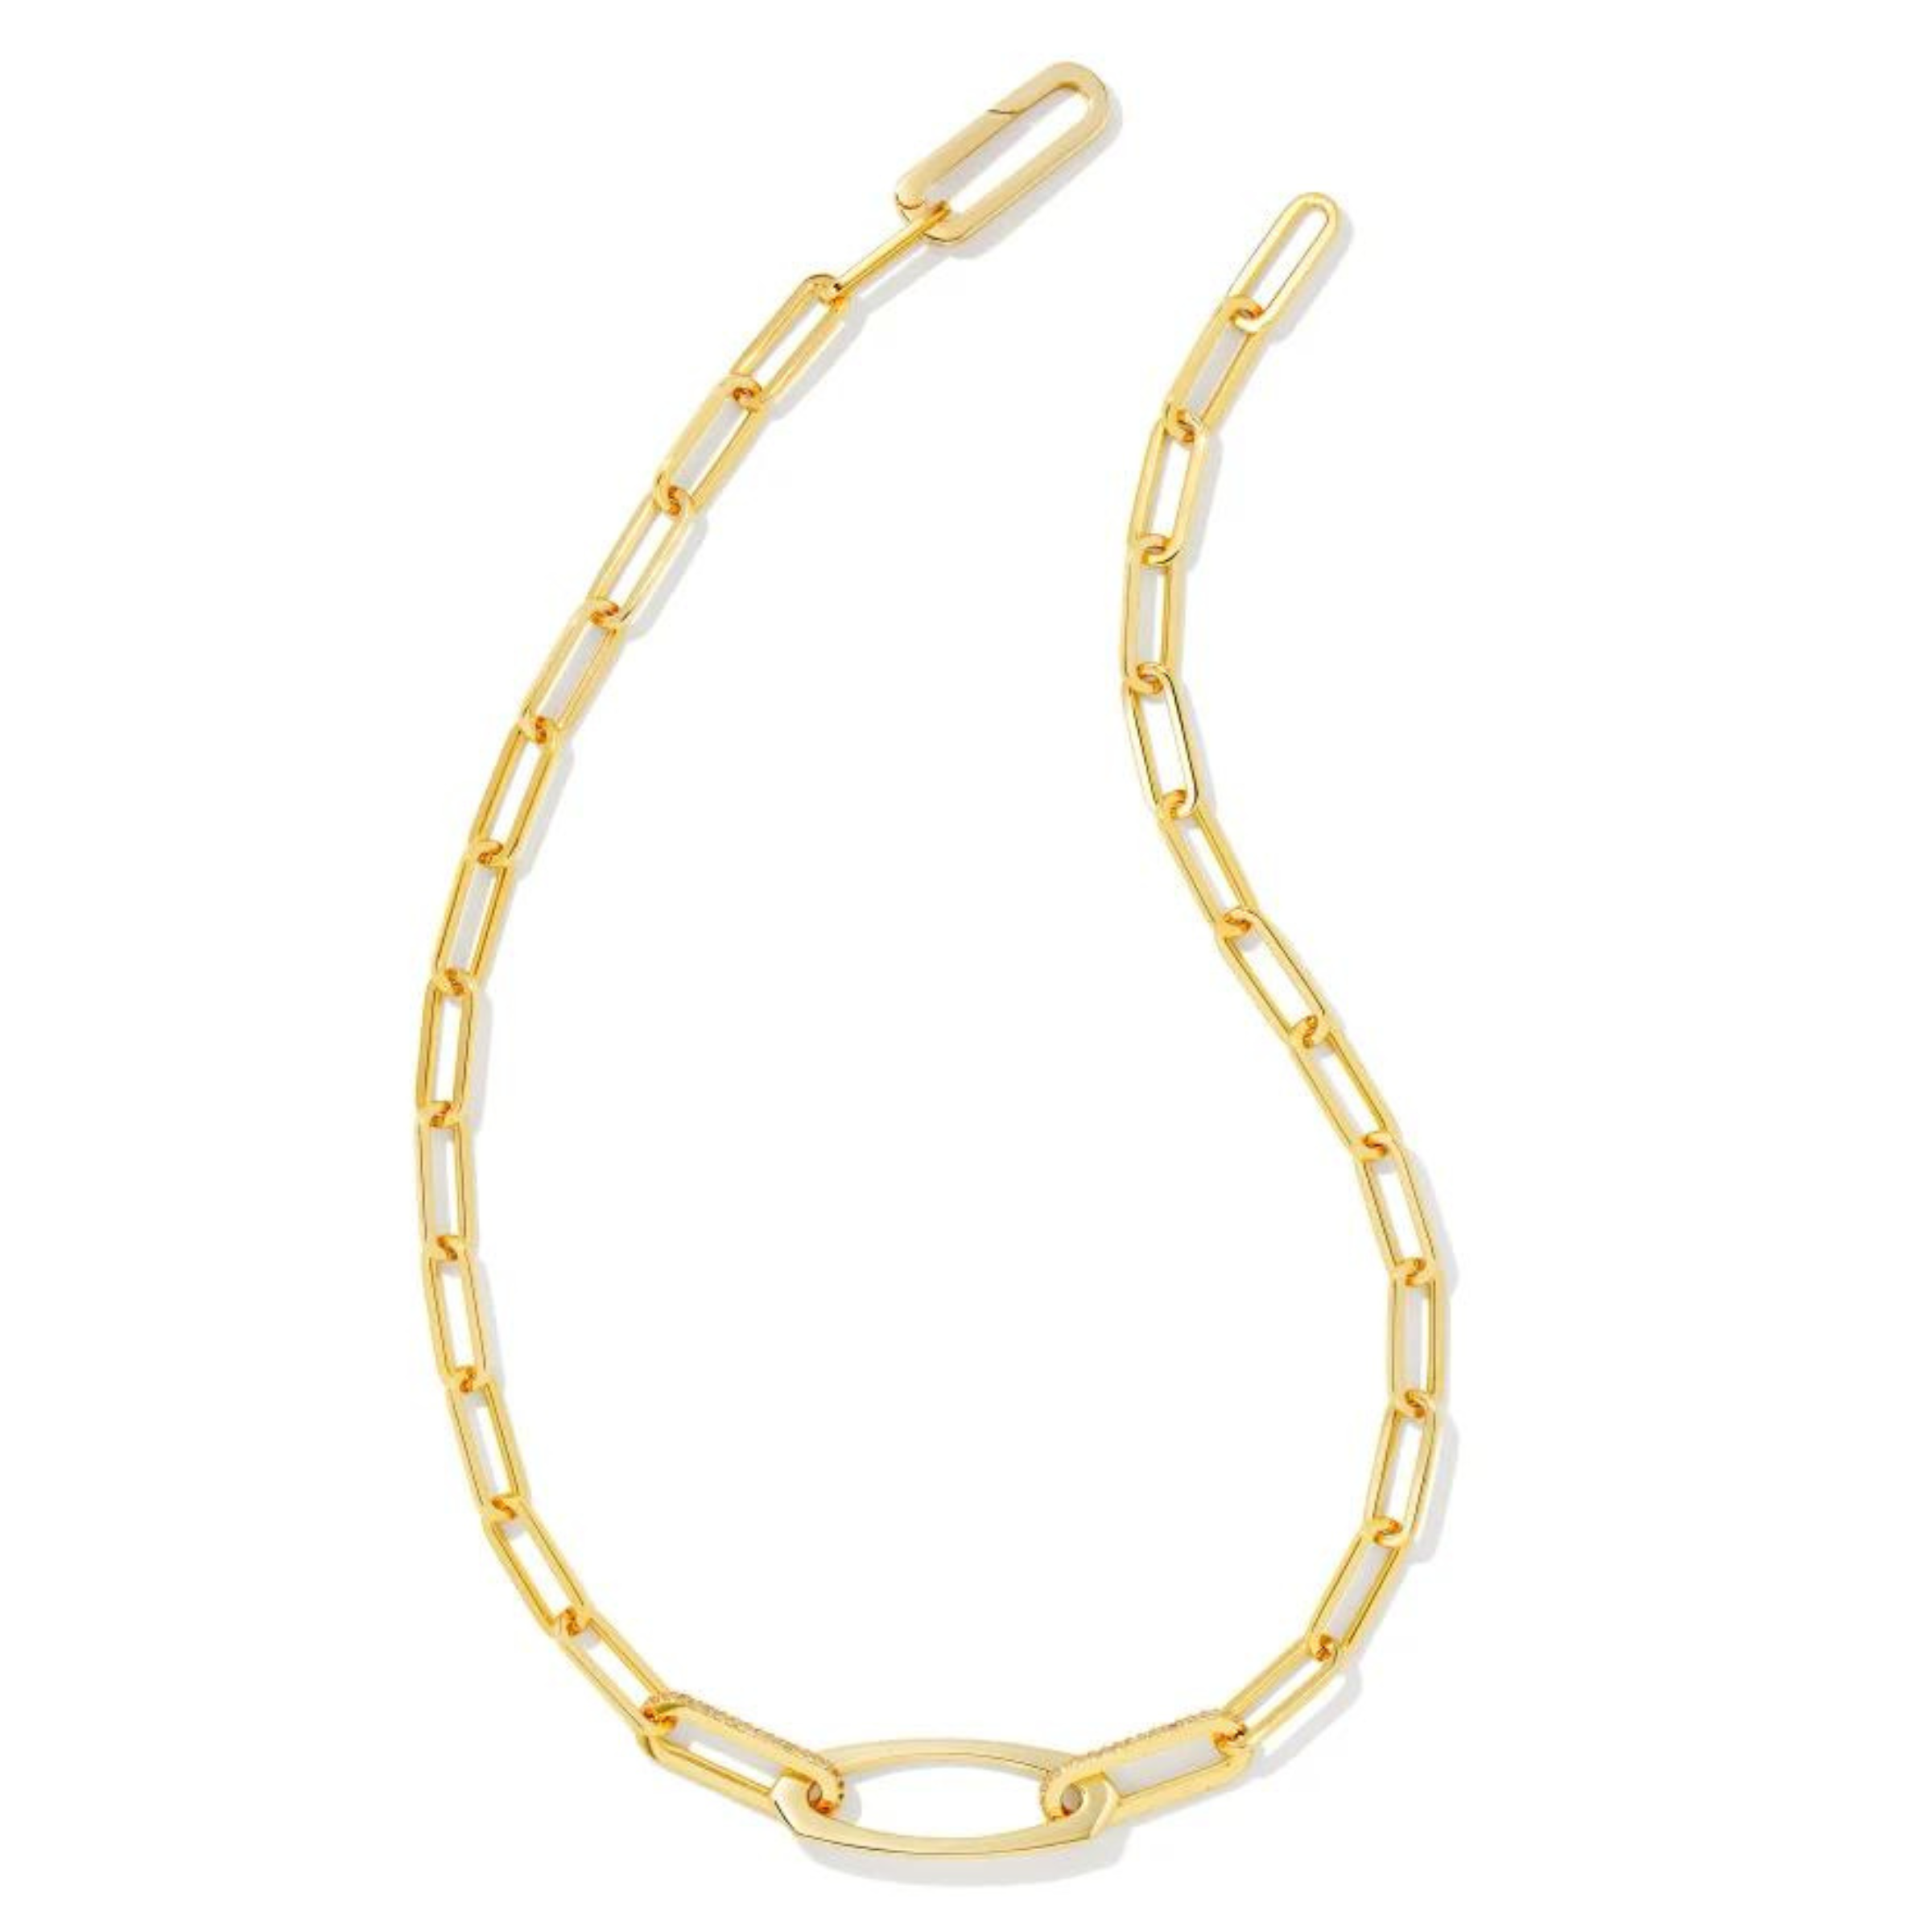 Kendra Scott | Adeline Chain Necklace in Gold - Giddy Up Glamour Boutique